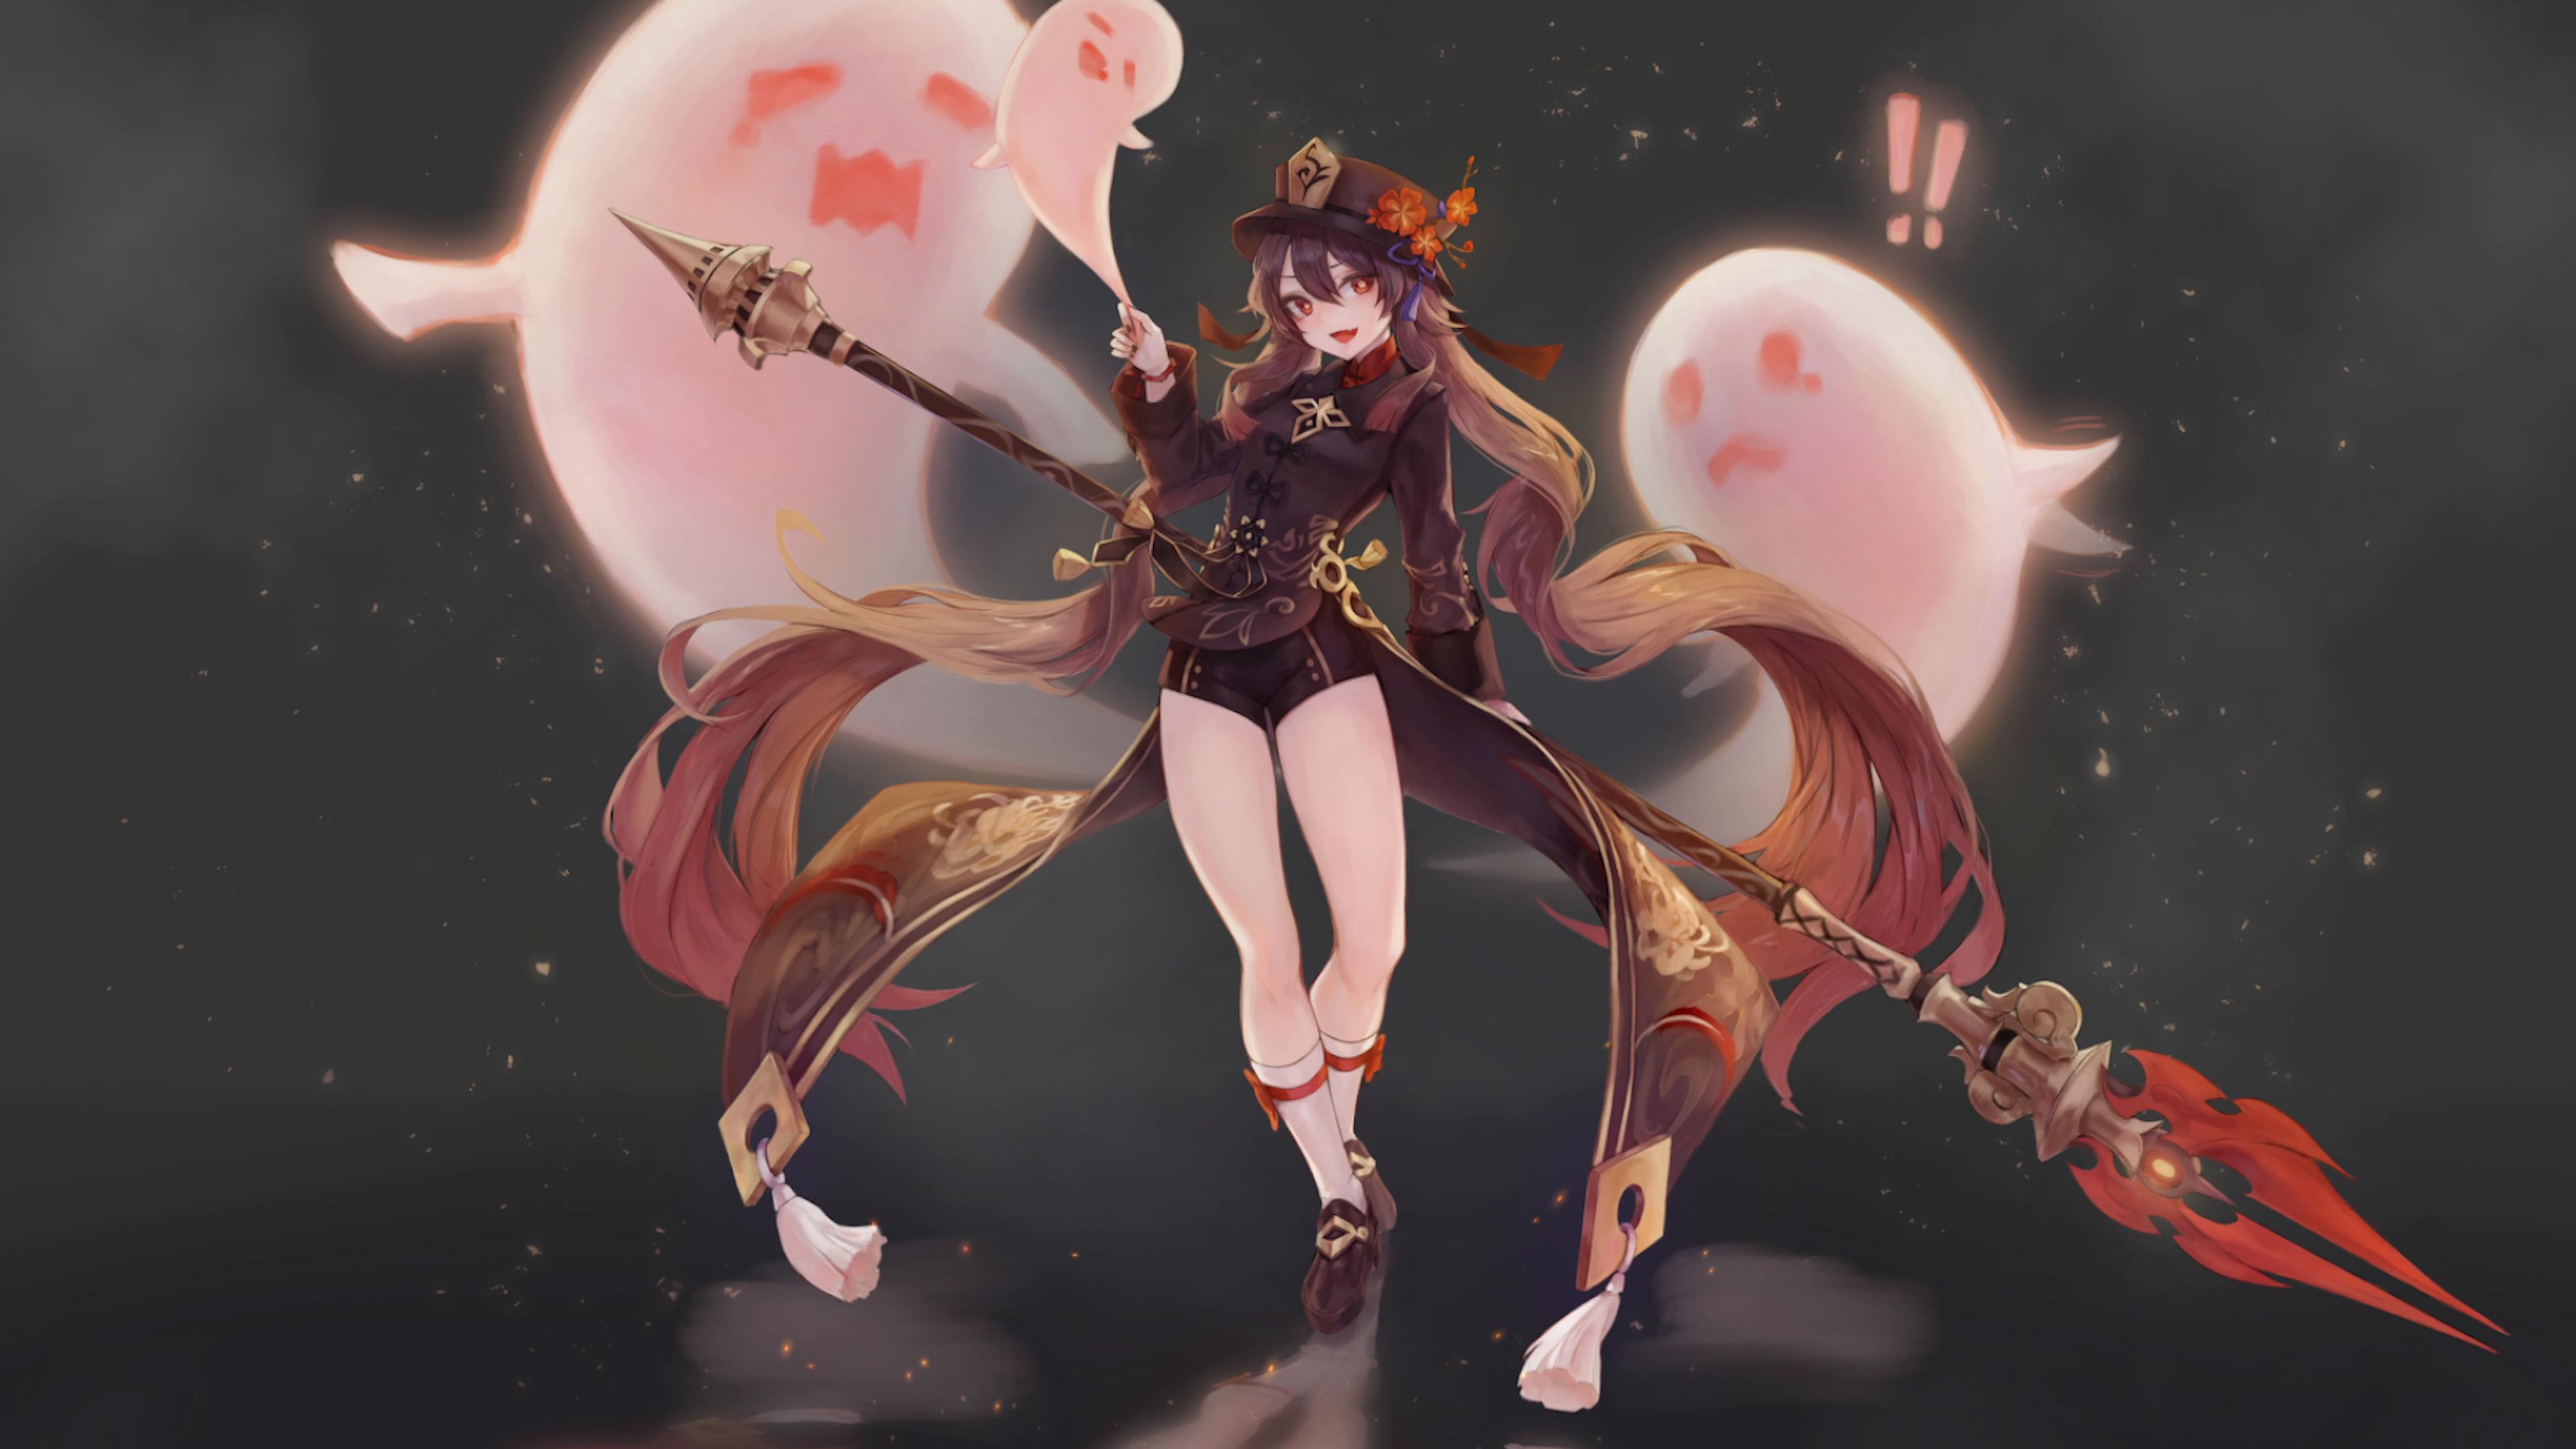 Halloween fever Hu Tao animation, I made this also into the hd animated  wallpaper but i decided to share it's lesser version as gif for you to  enjoy too, hope you like